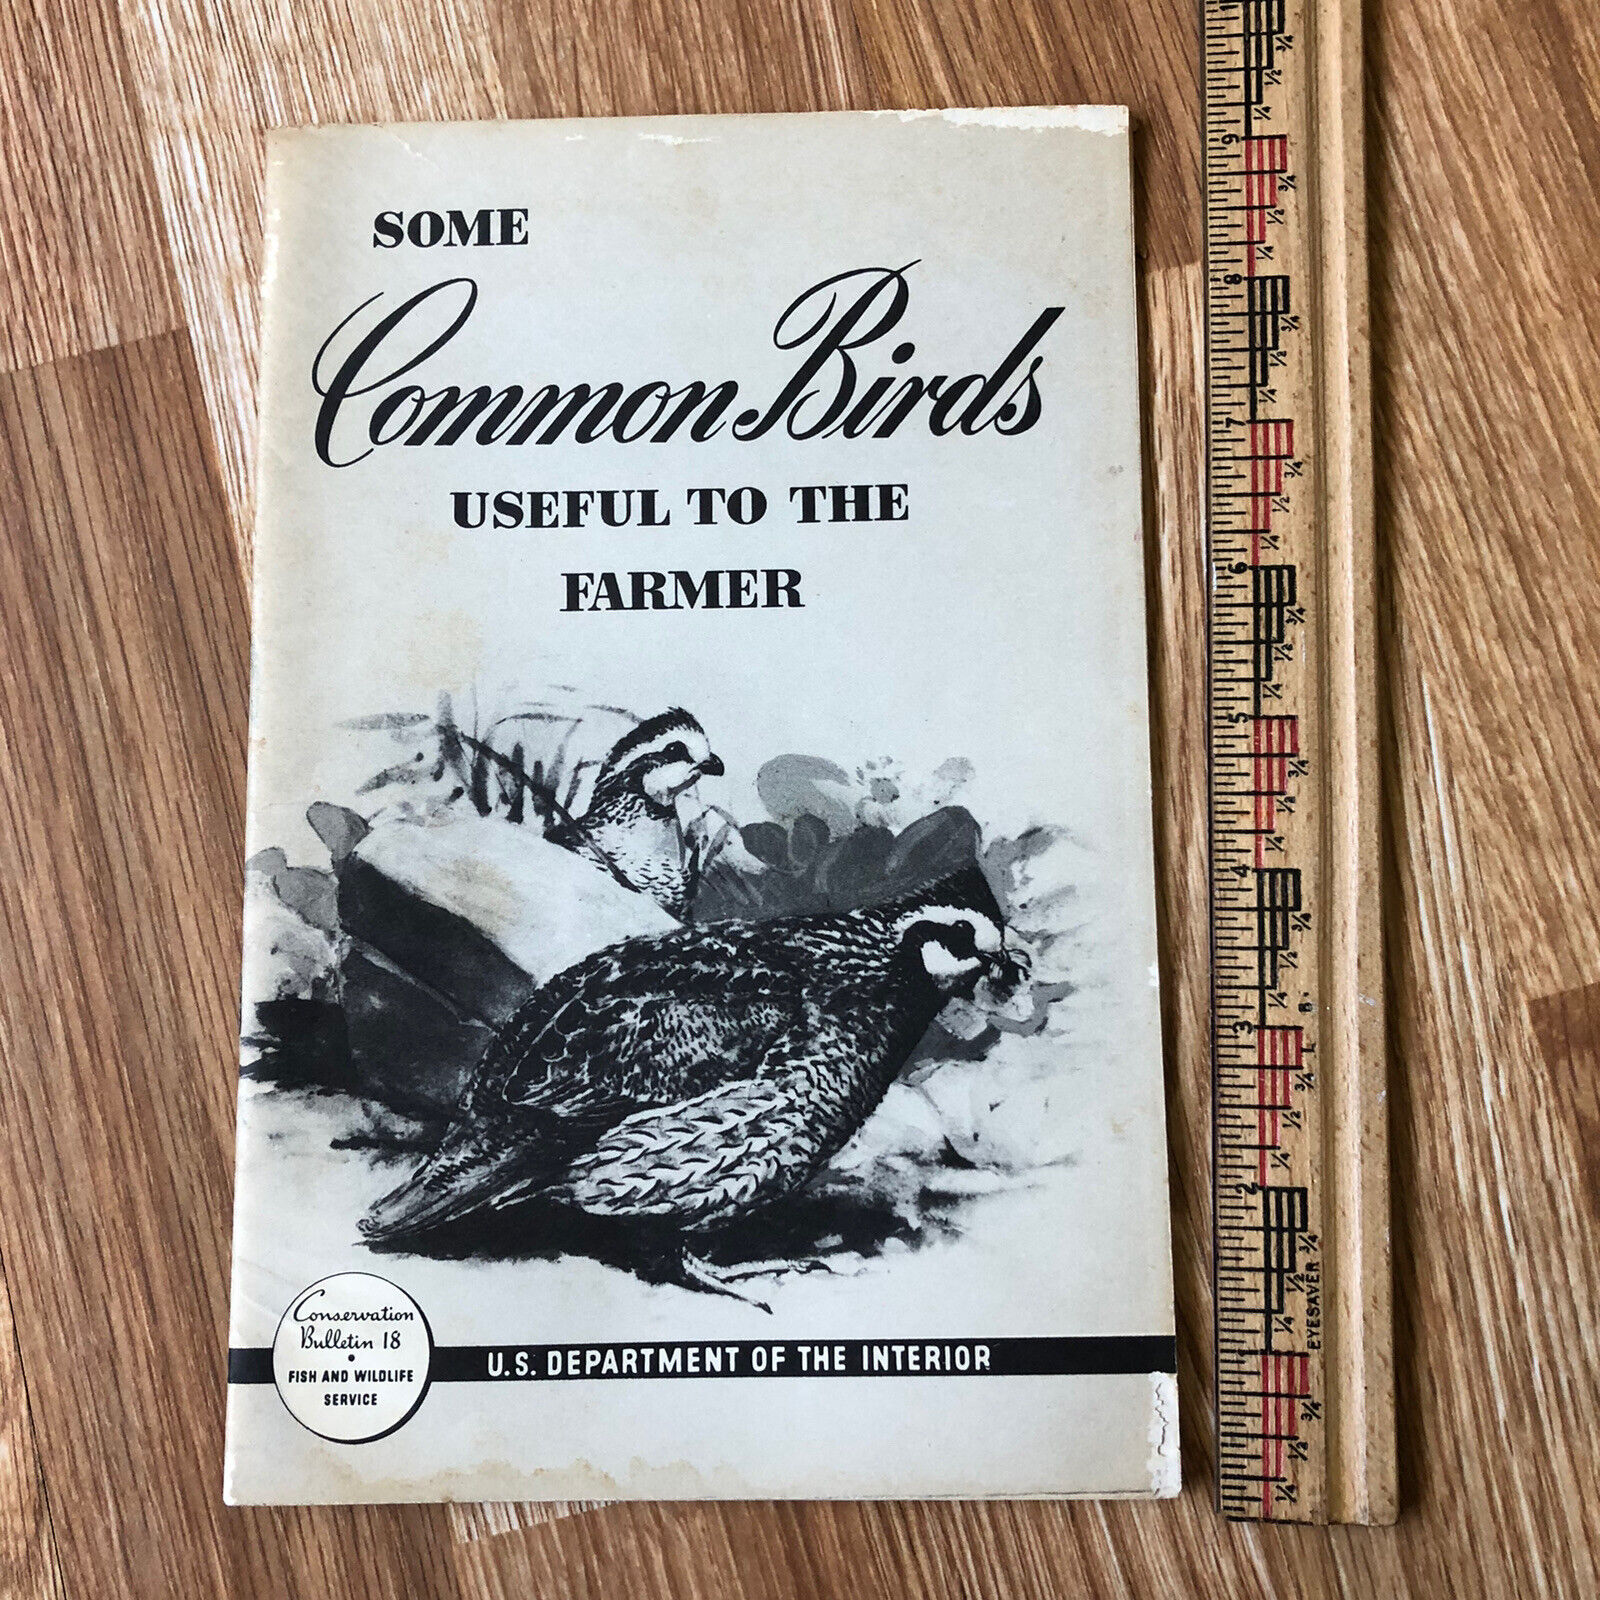 Some Common Birds Useful to the Farmer 1937 US Dept of Interior Booklet Vintage